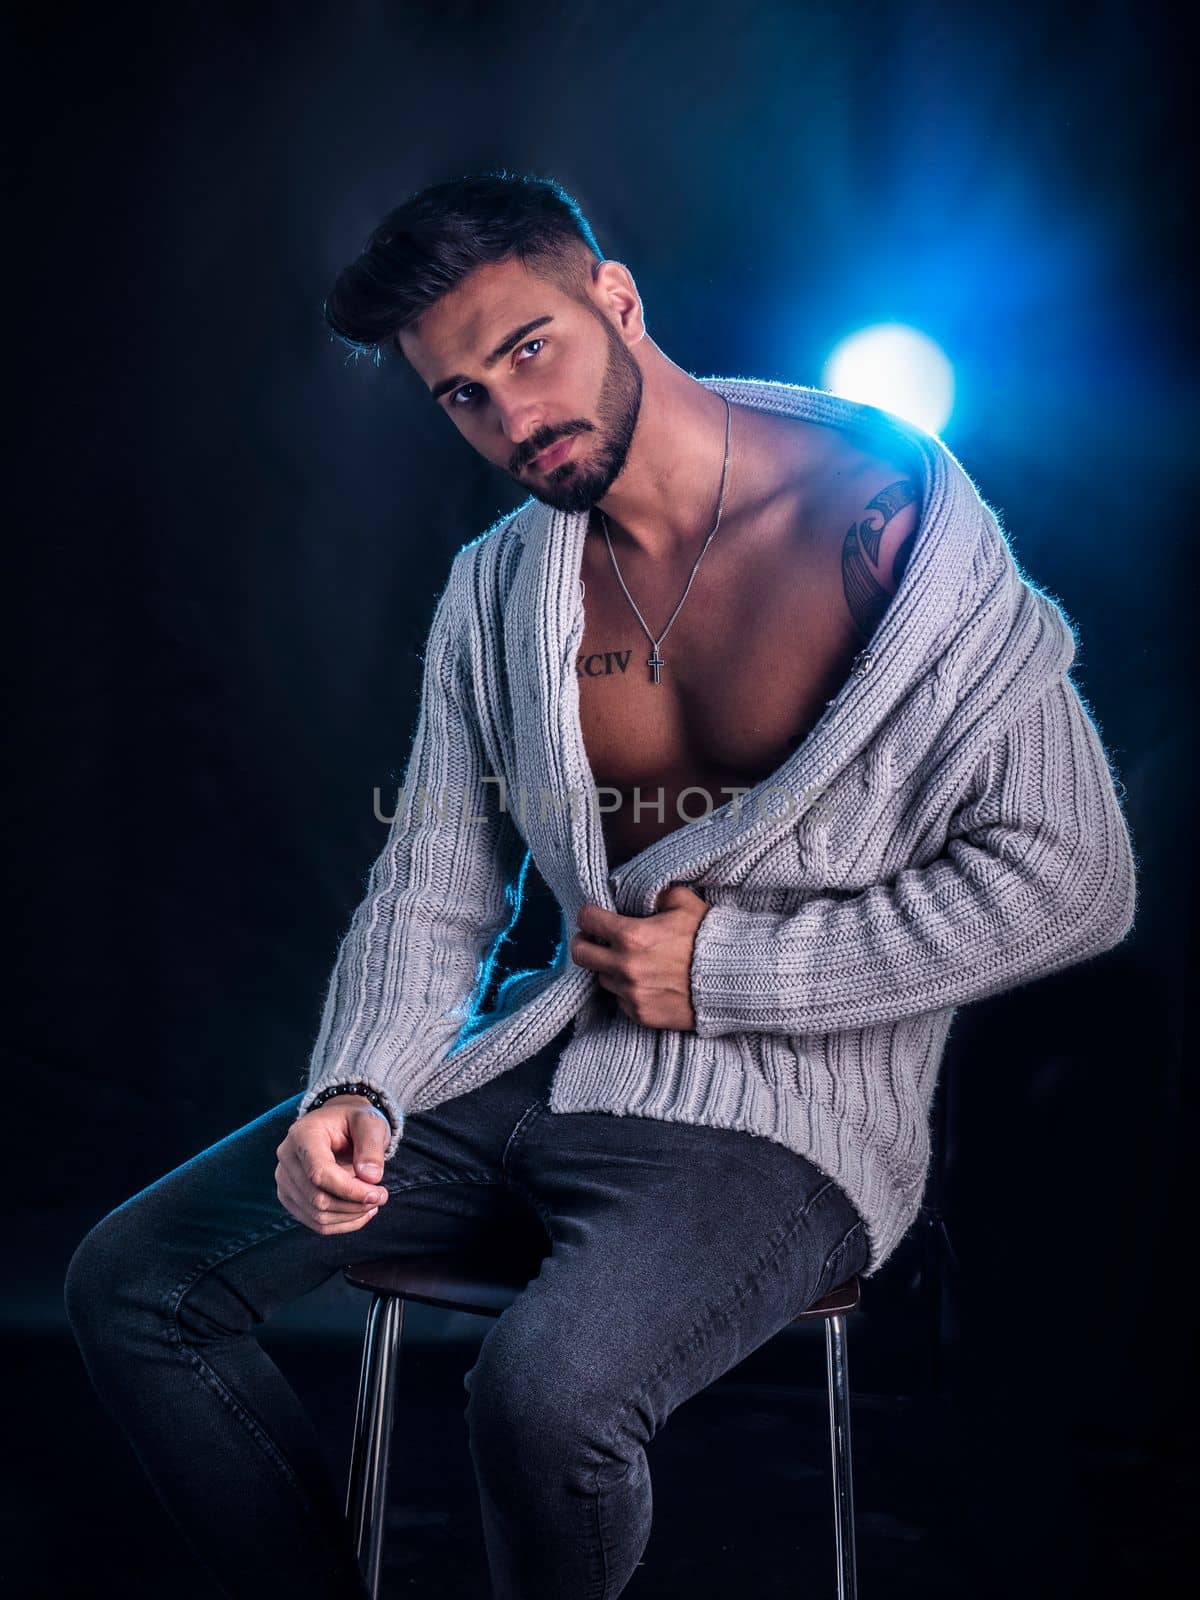 Attractive young man sitting on stool, wearing wool sweater by artofphoto